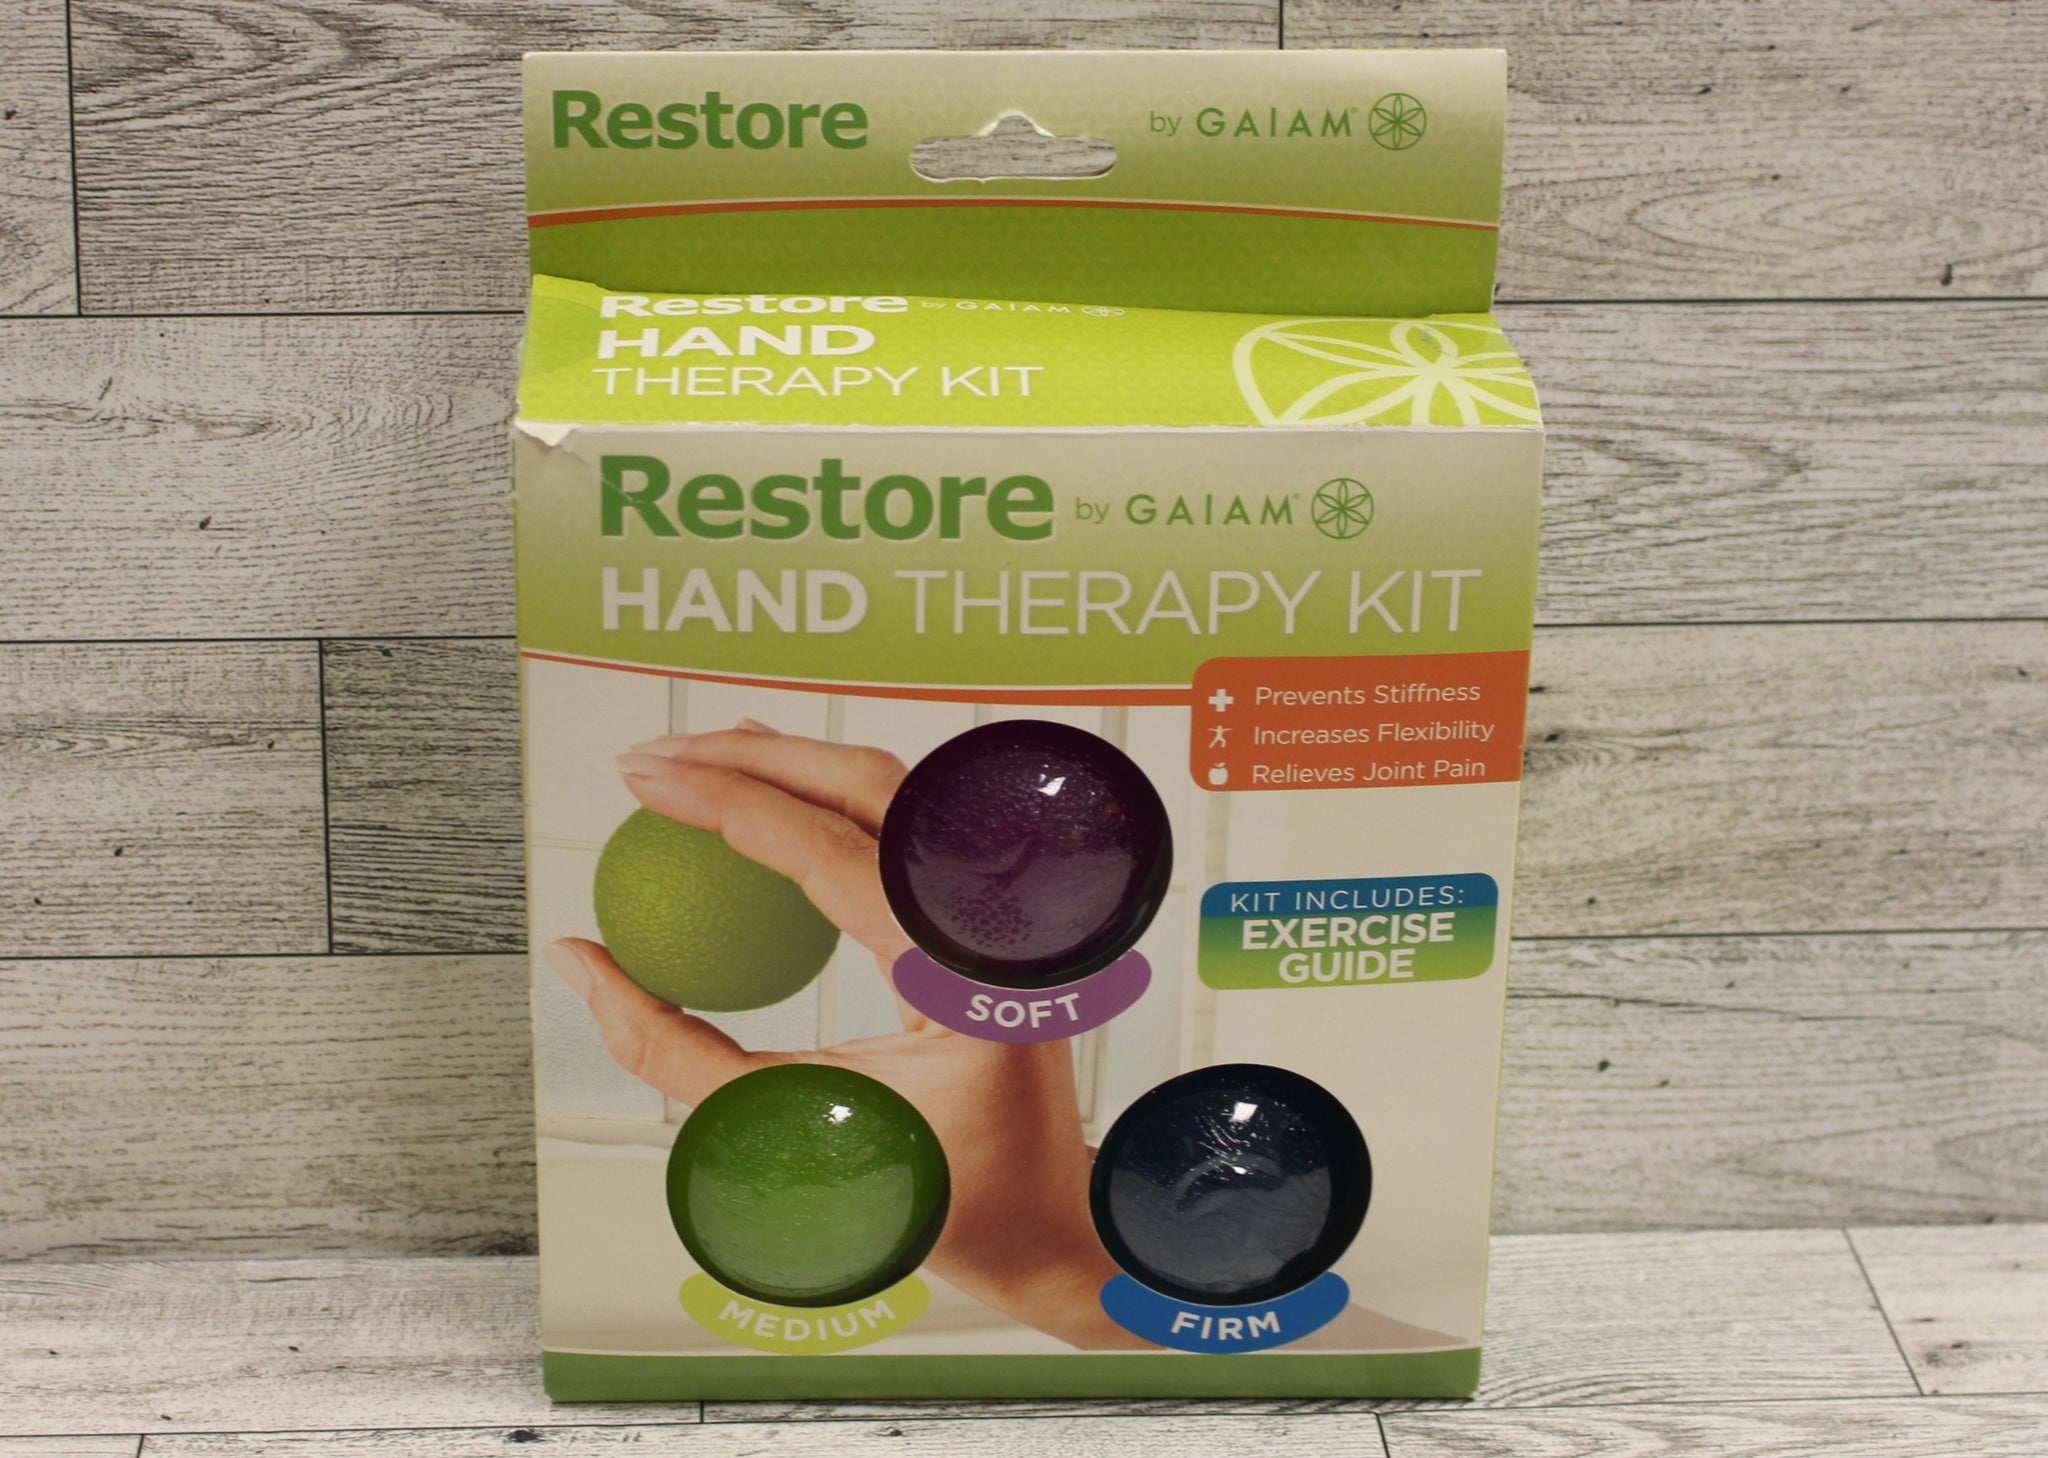 Gaiam Restore Hand Therapy Kit with Exercise Balls - 3 Pack - New